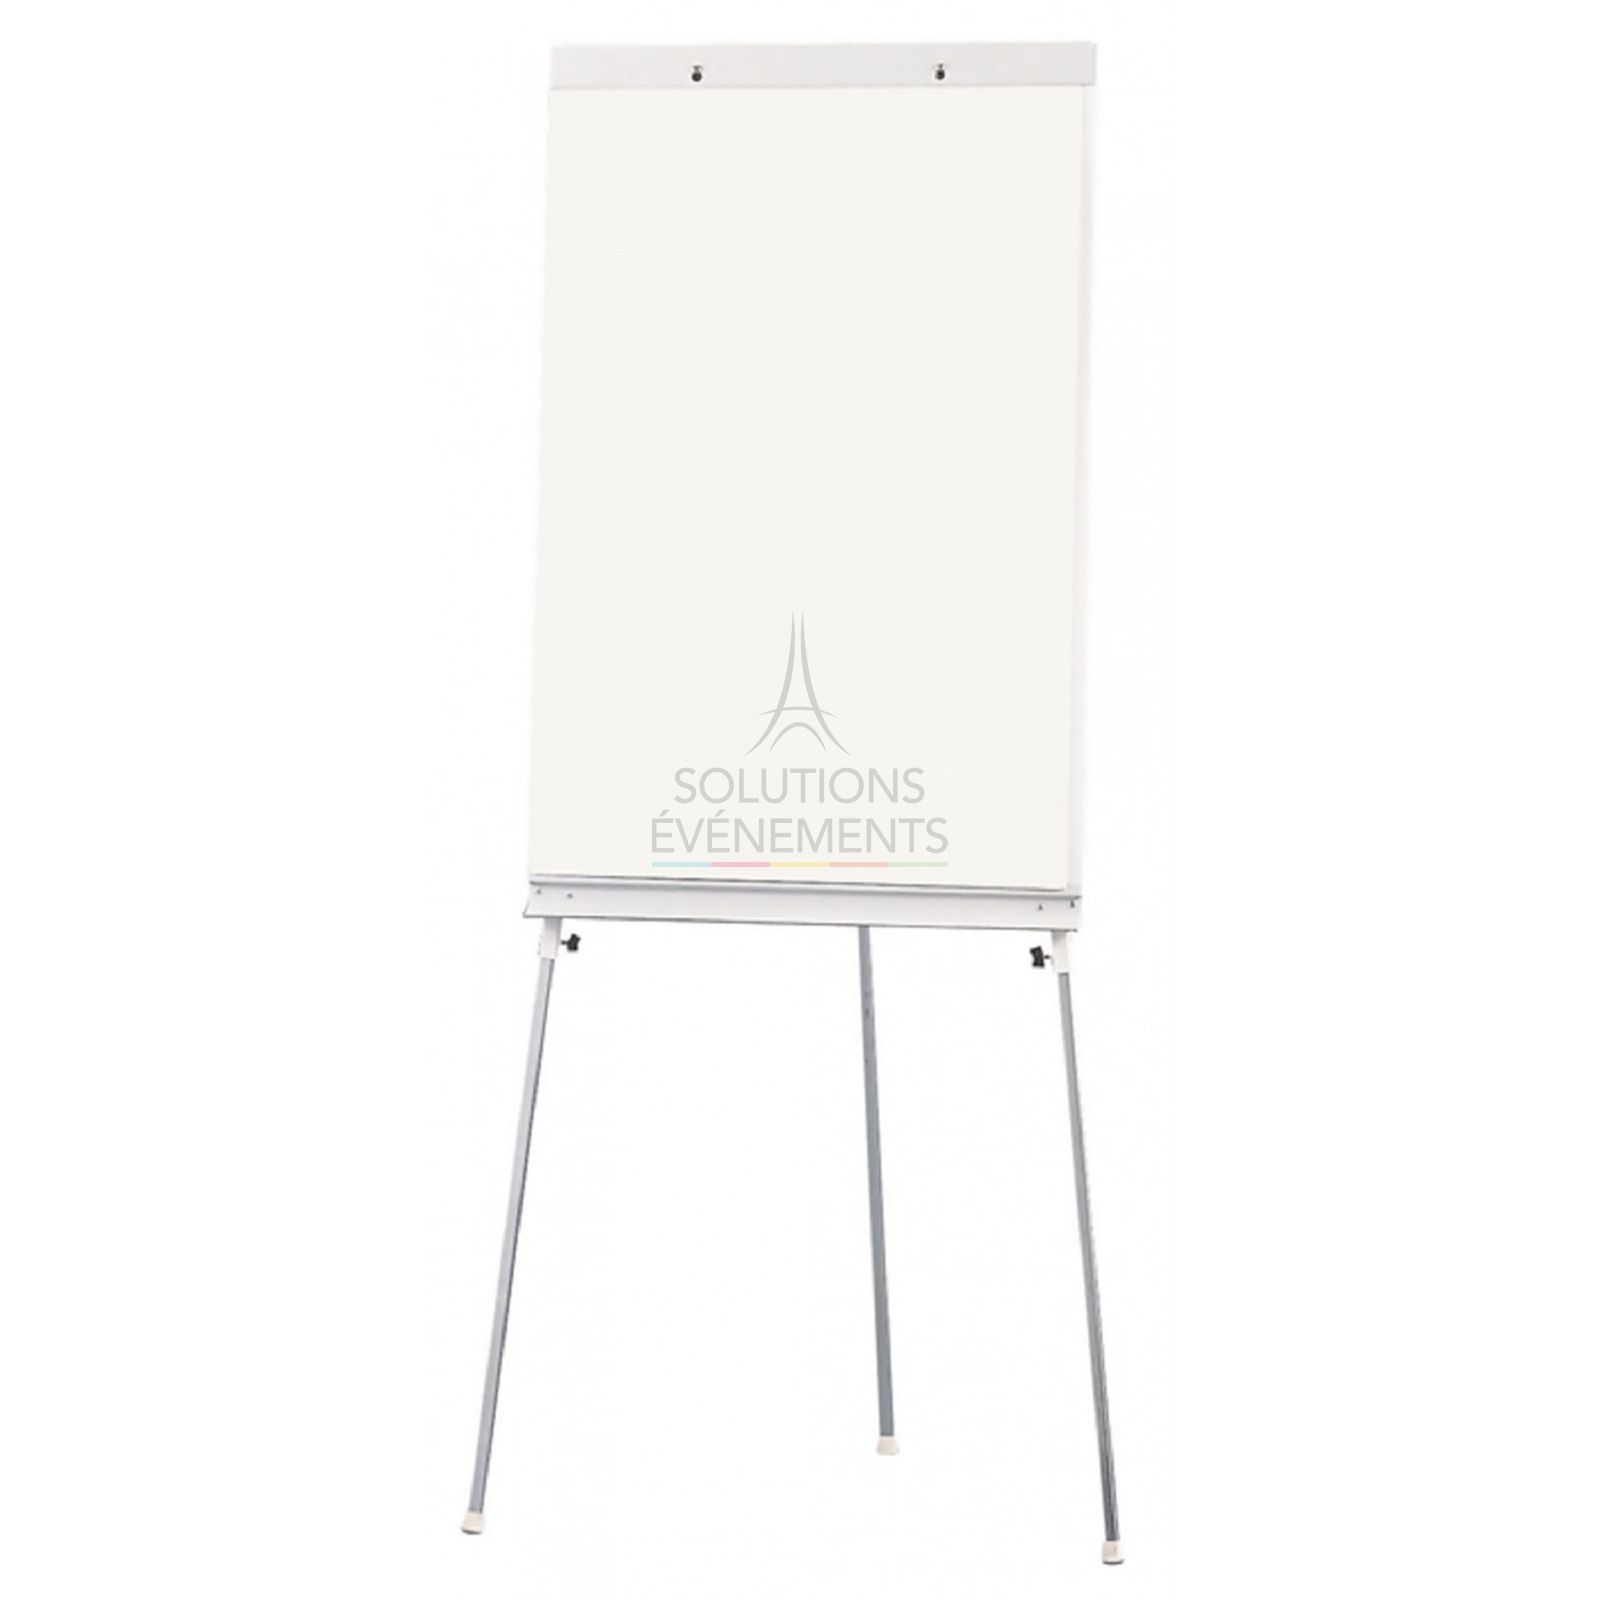 Flipchart and conference easel rental